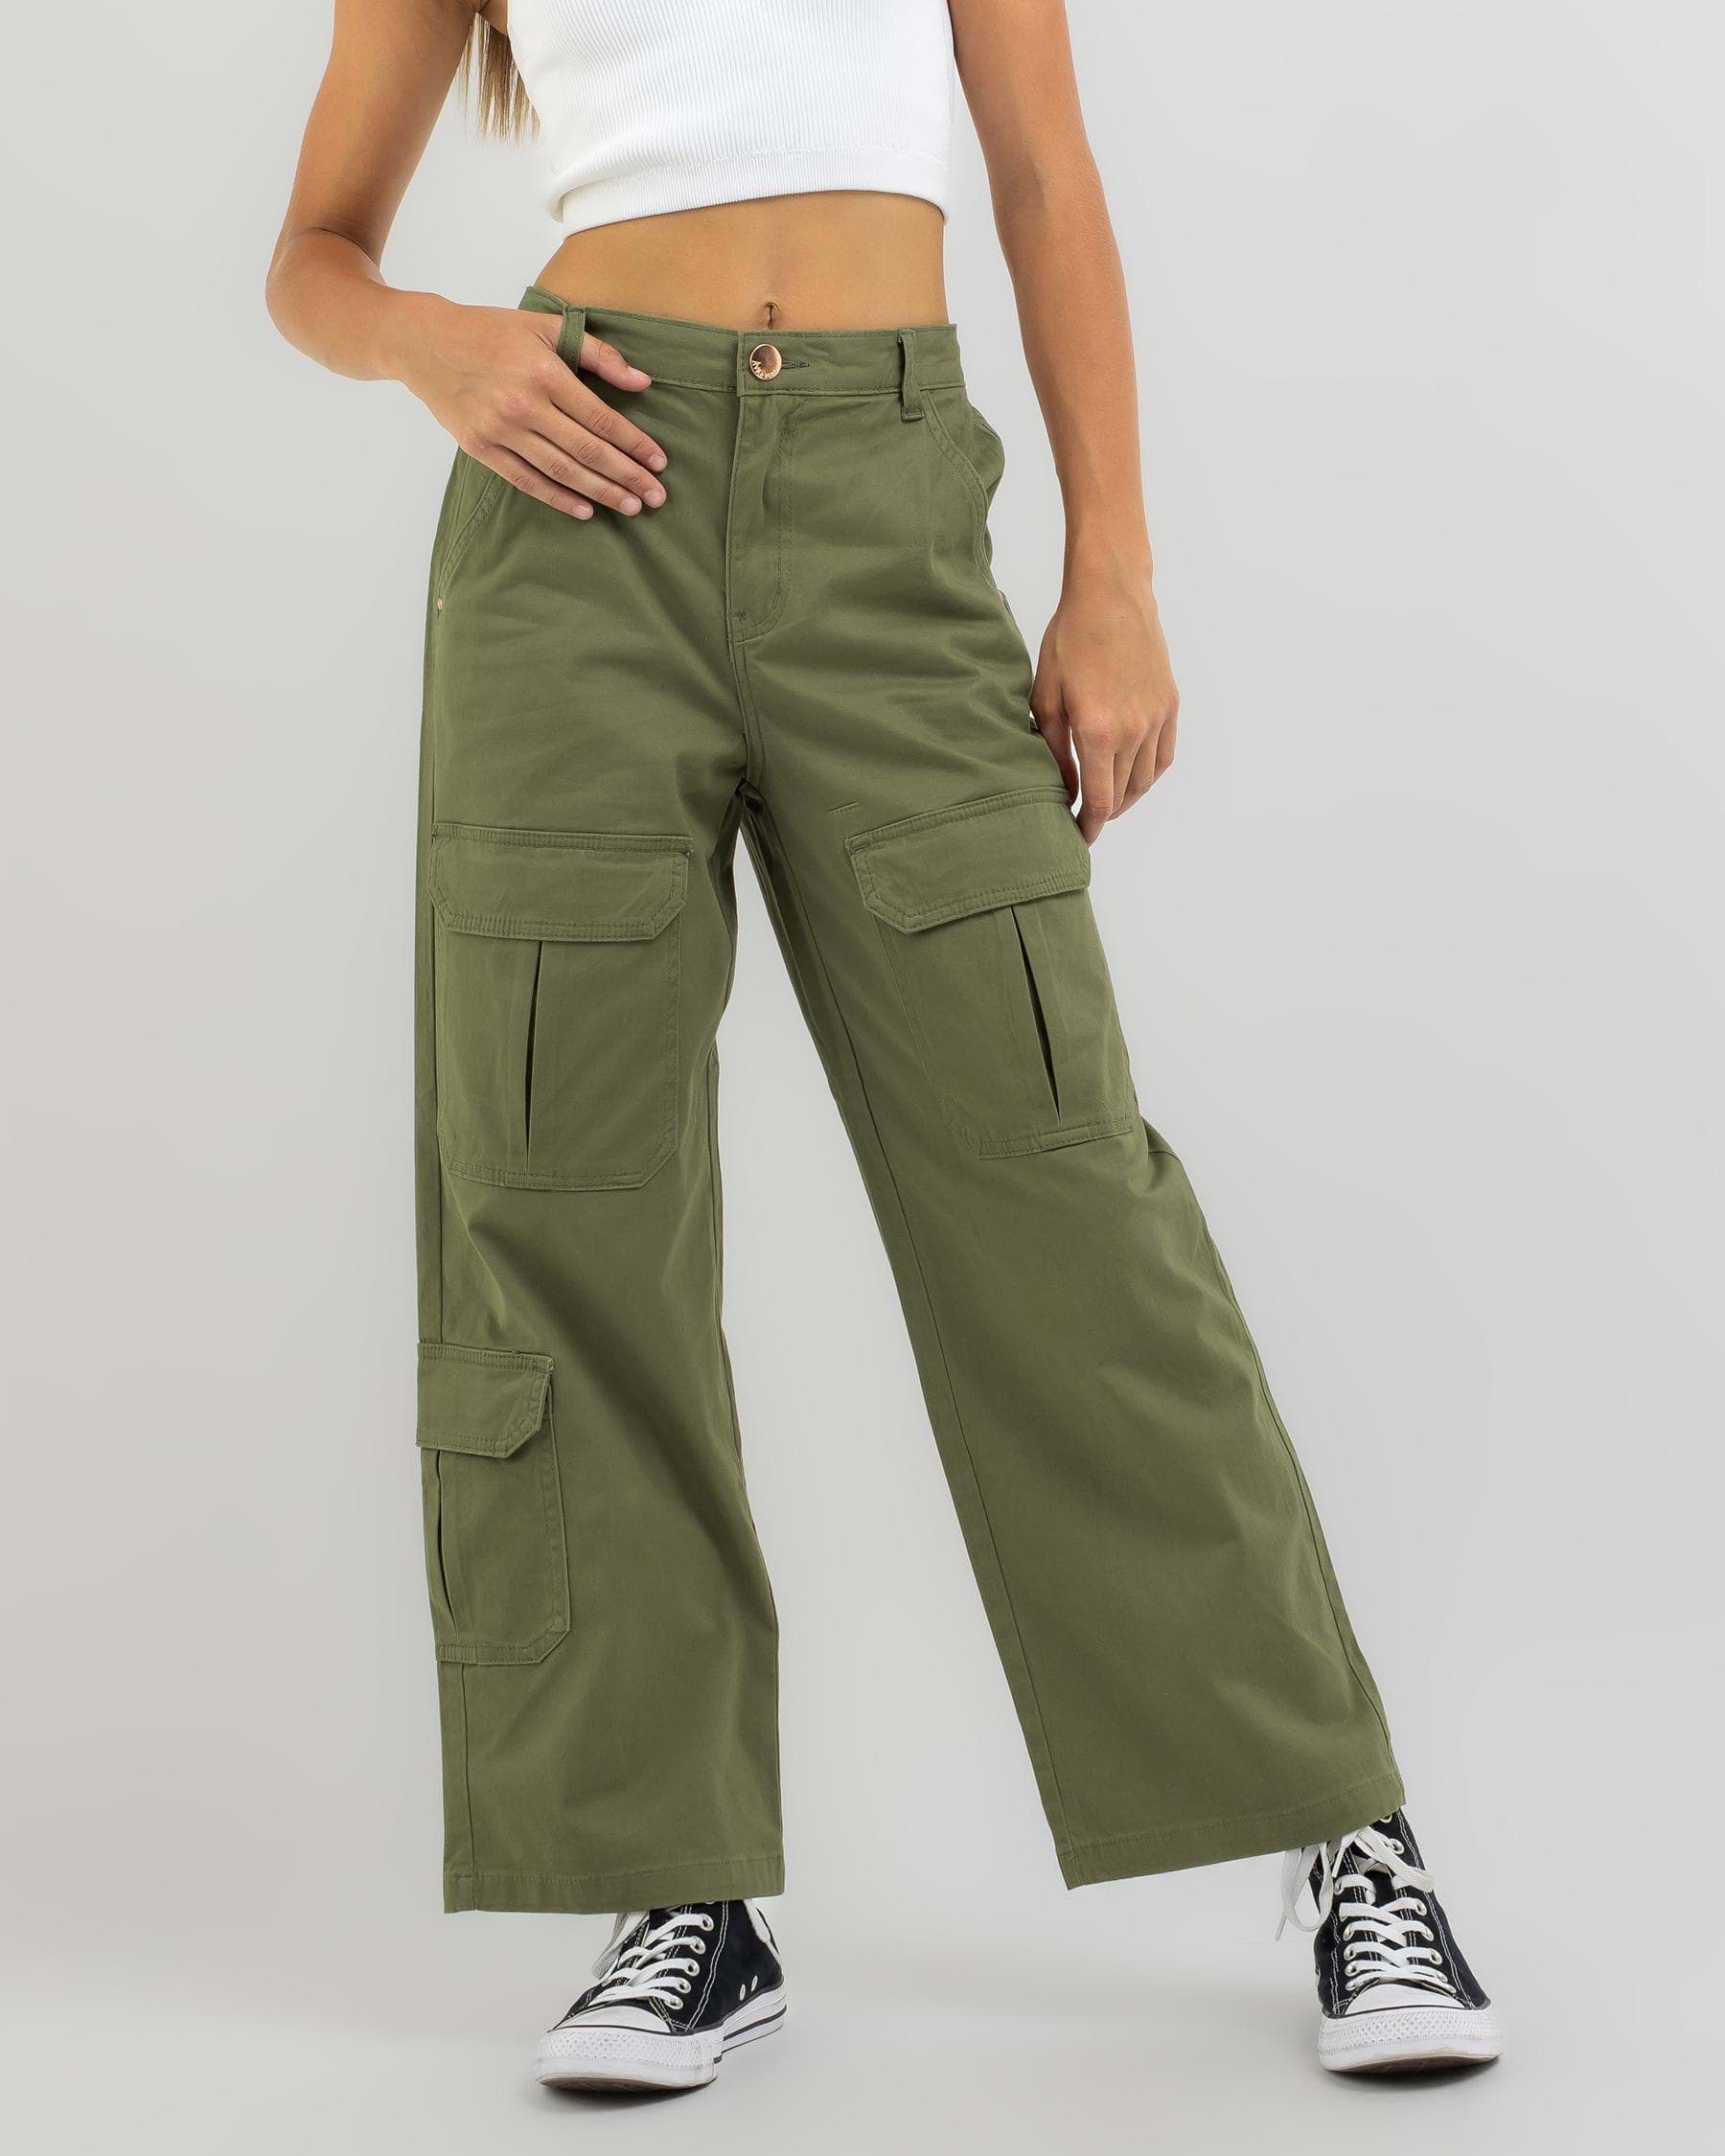 Shop Ava And Ever Girls' Crew Pants In Khaki - Fast Shipping & Easy ...